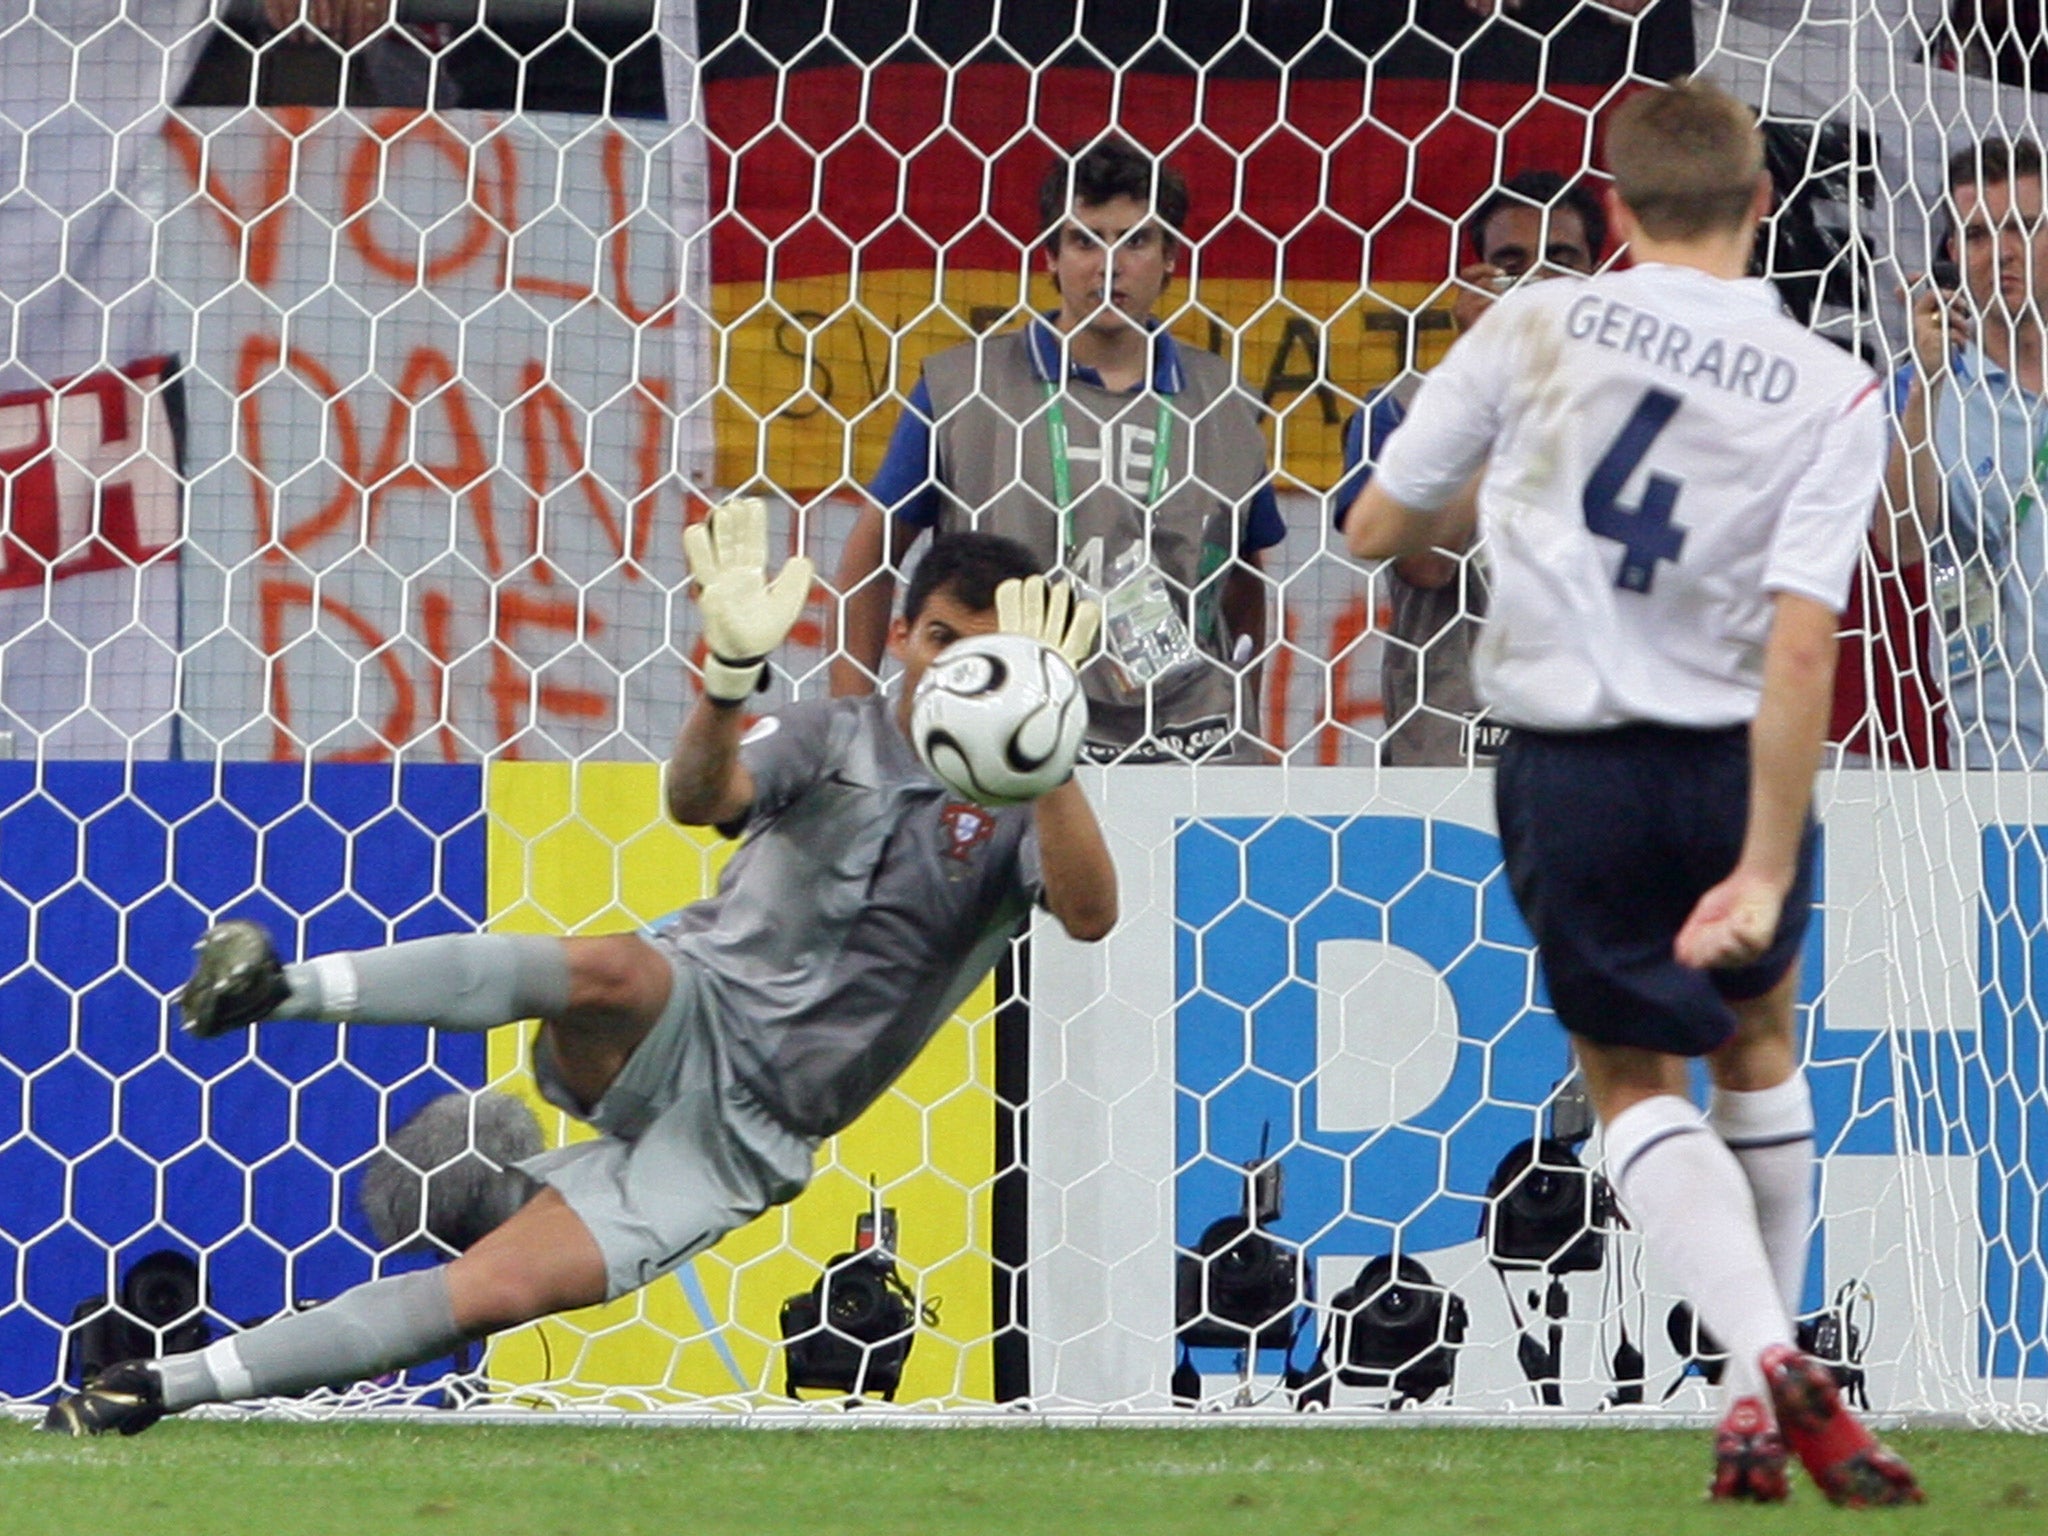 England's Steven Gerrard sees his penalty saved during a yet another heartbreaking shootout defeat at the hands of Portugal in the 2006 World Cup